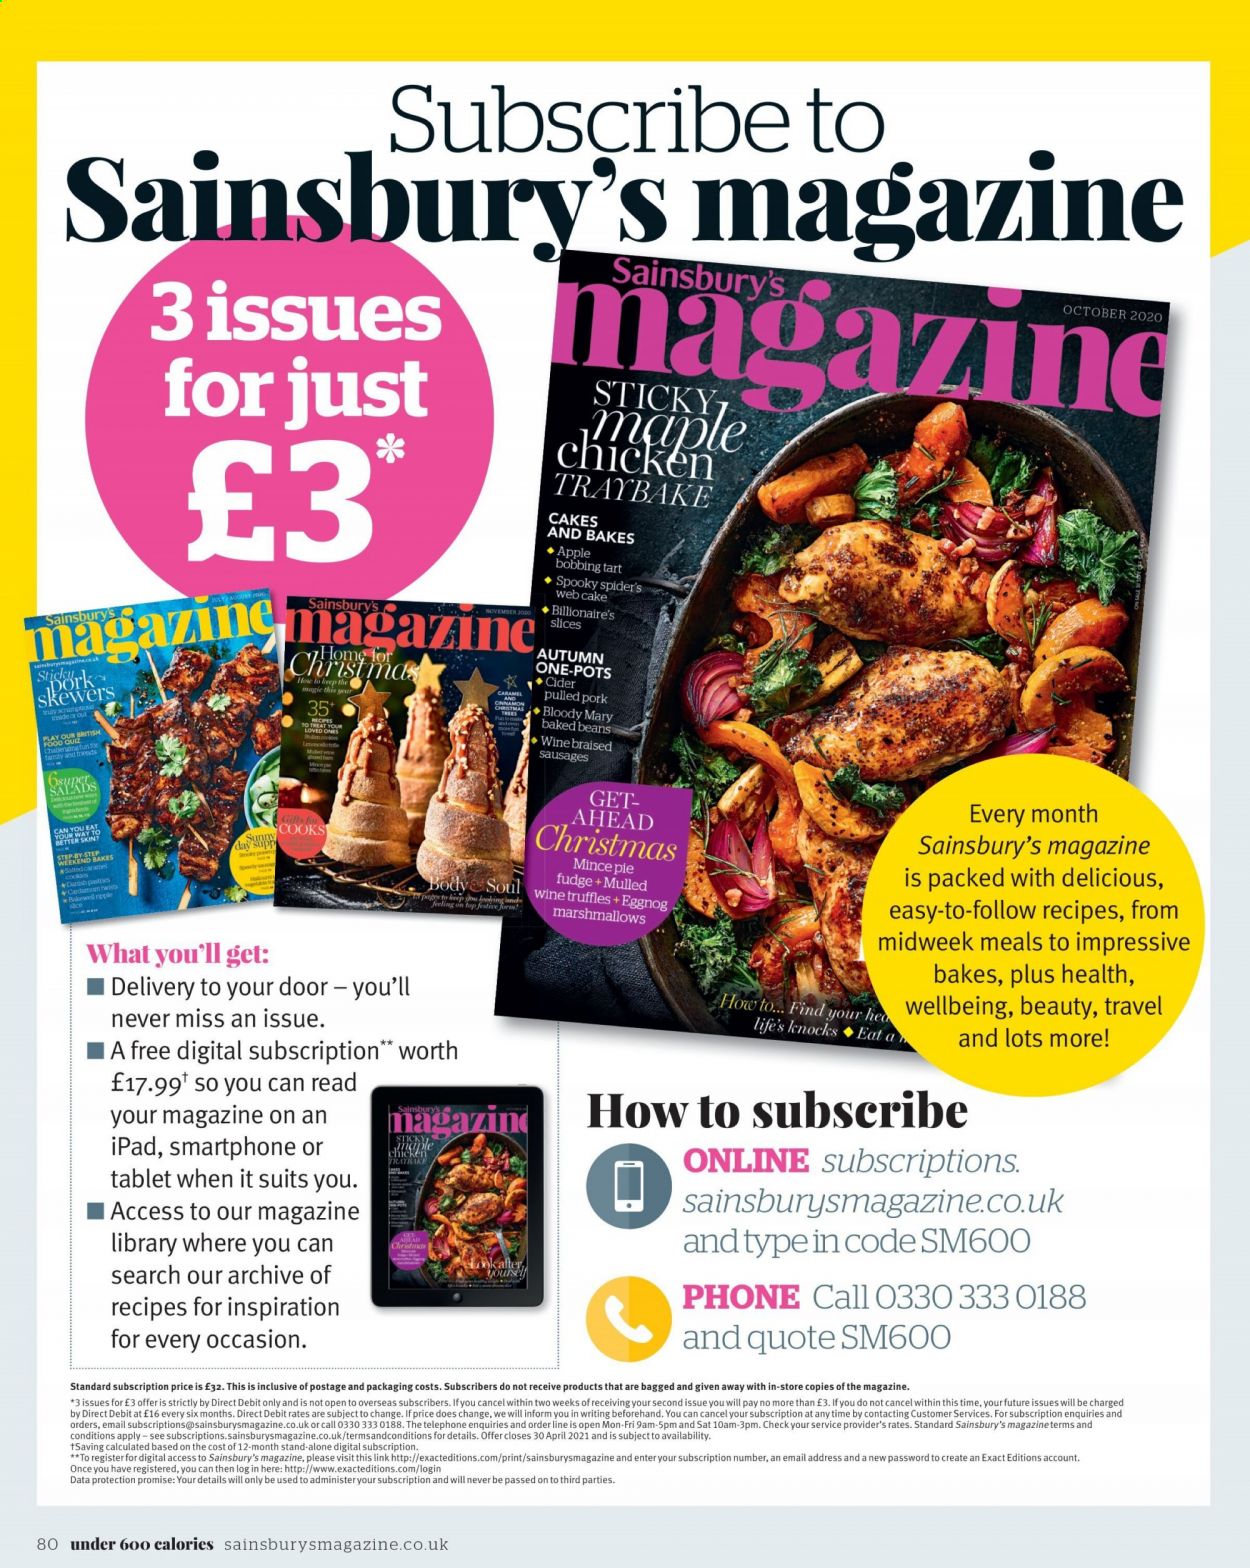 Sainsbury's offer . Page 80.